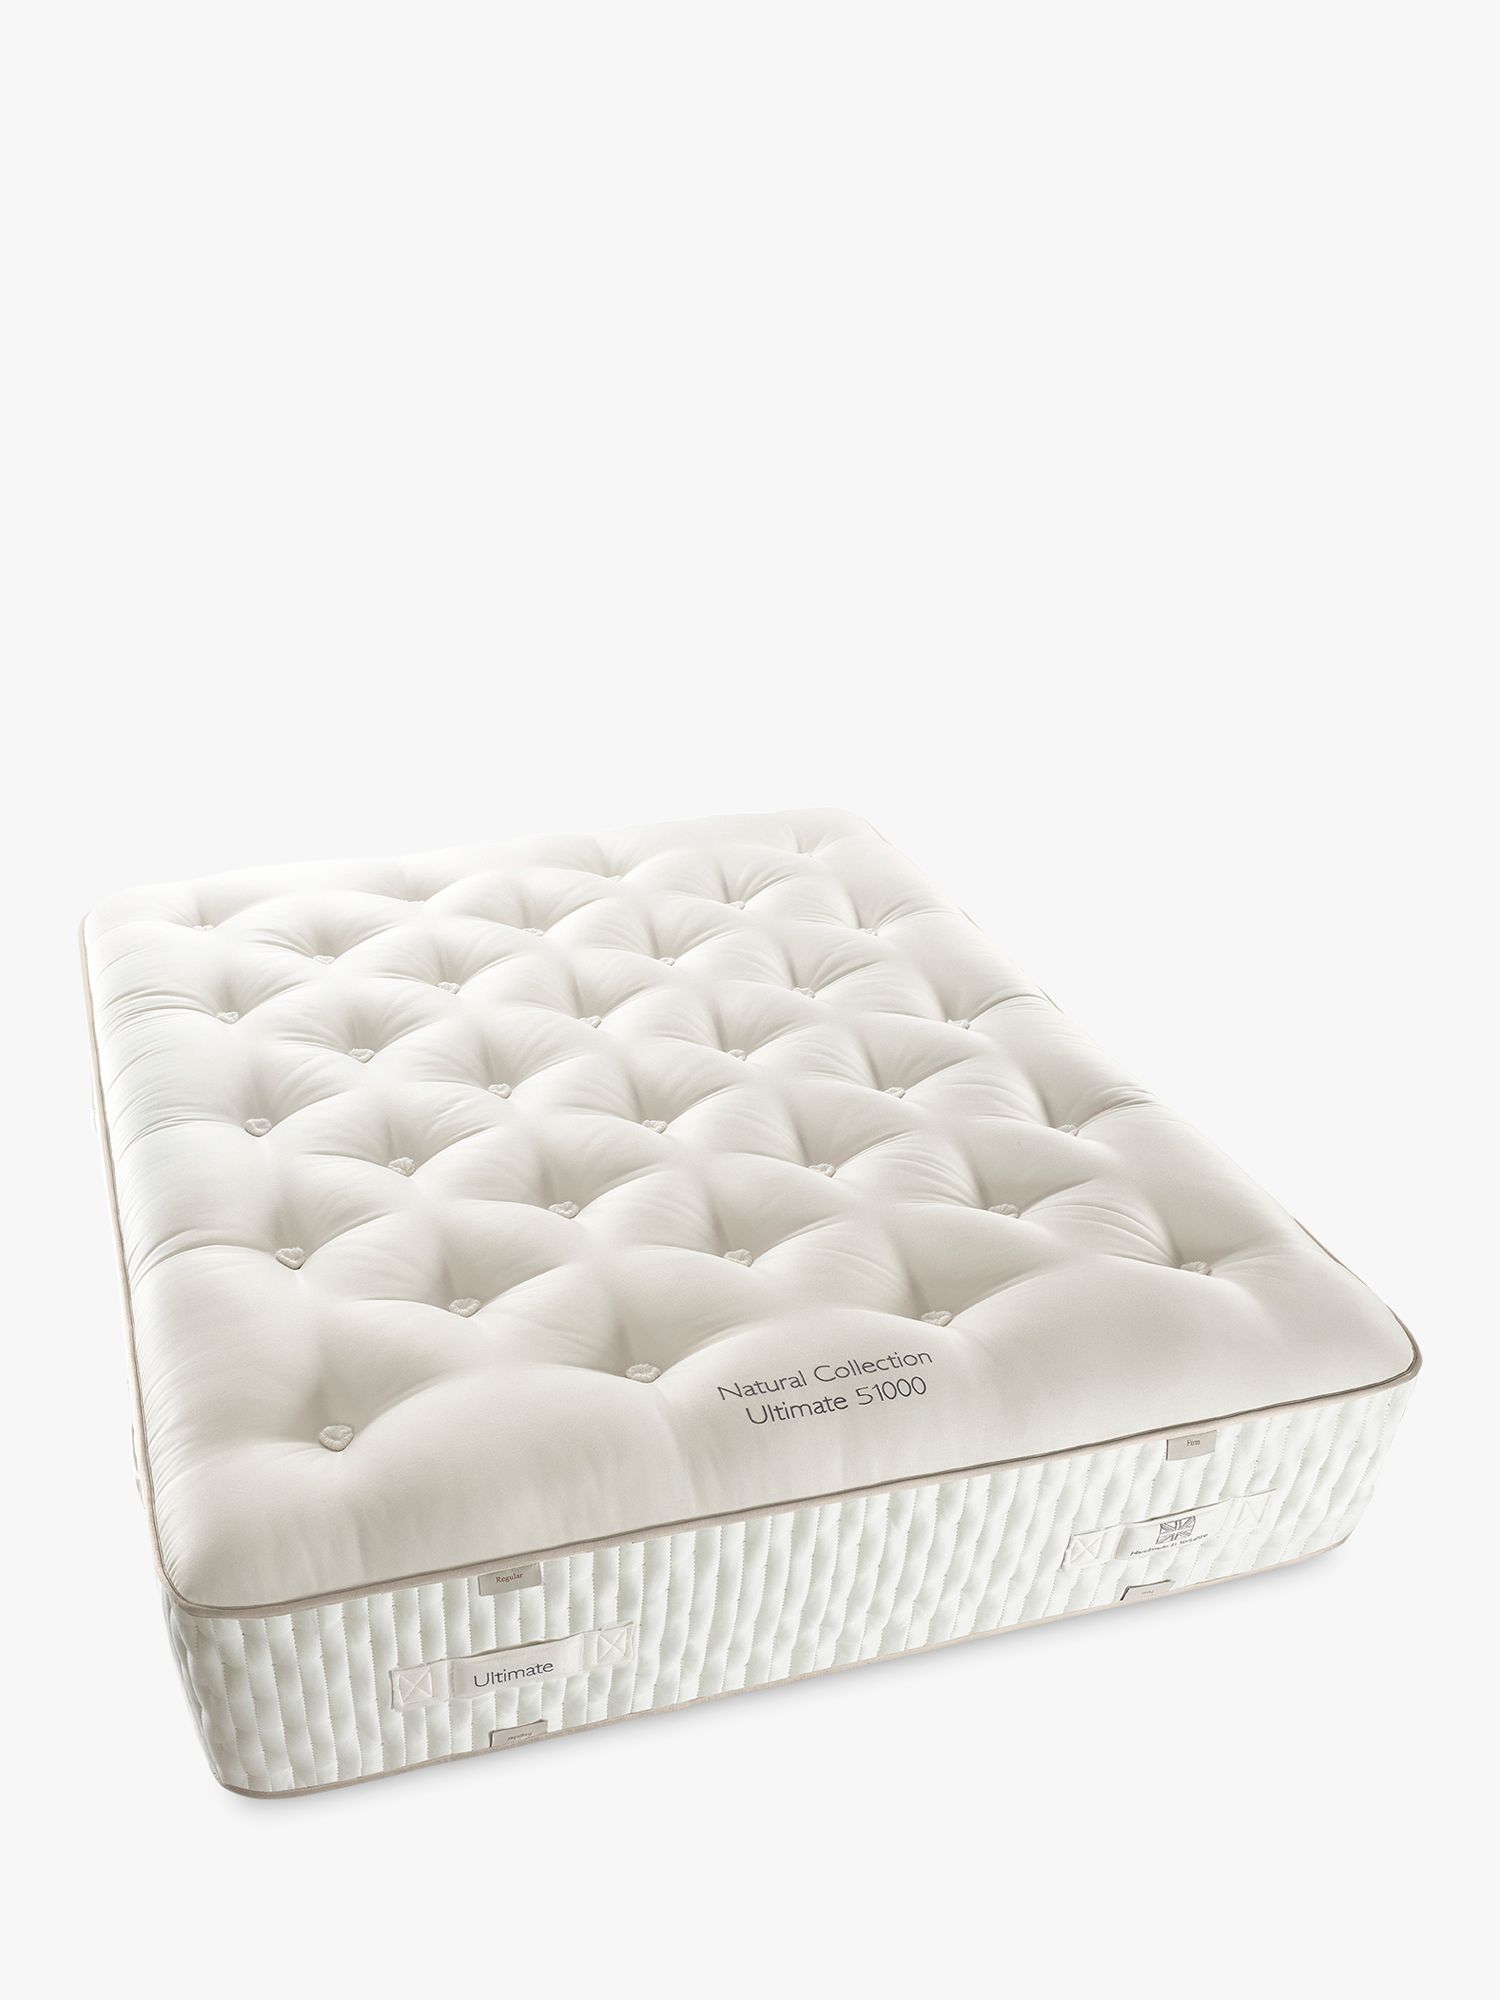 Photo of John lewis ultimate natural collection 51000 double regular tension pocket spring mattress